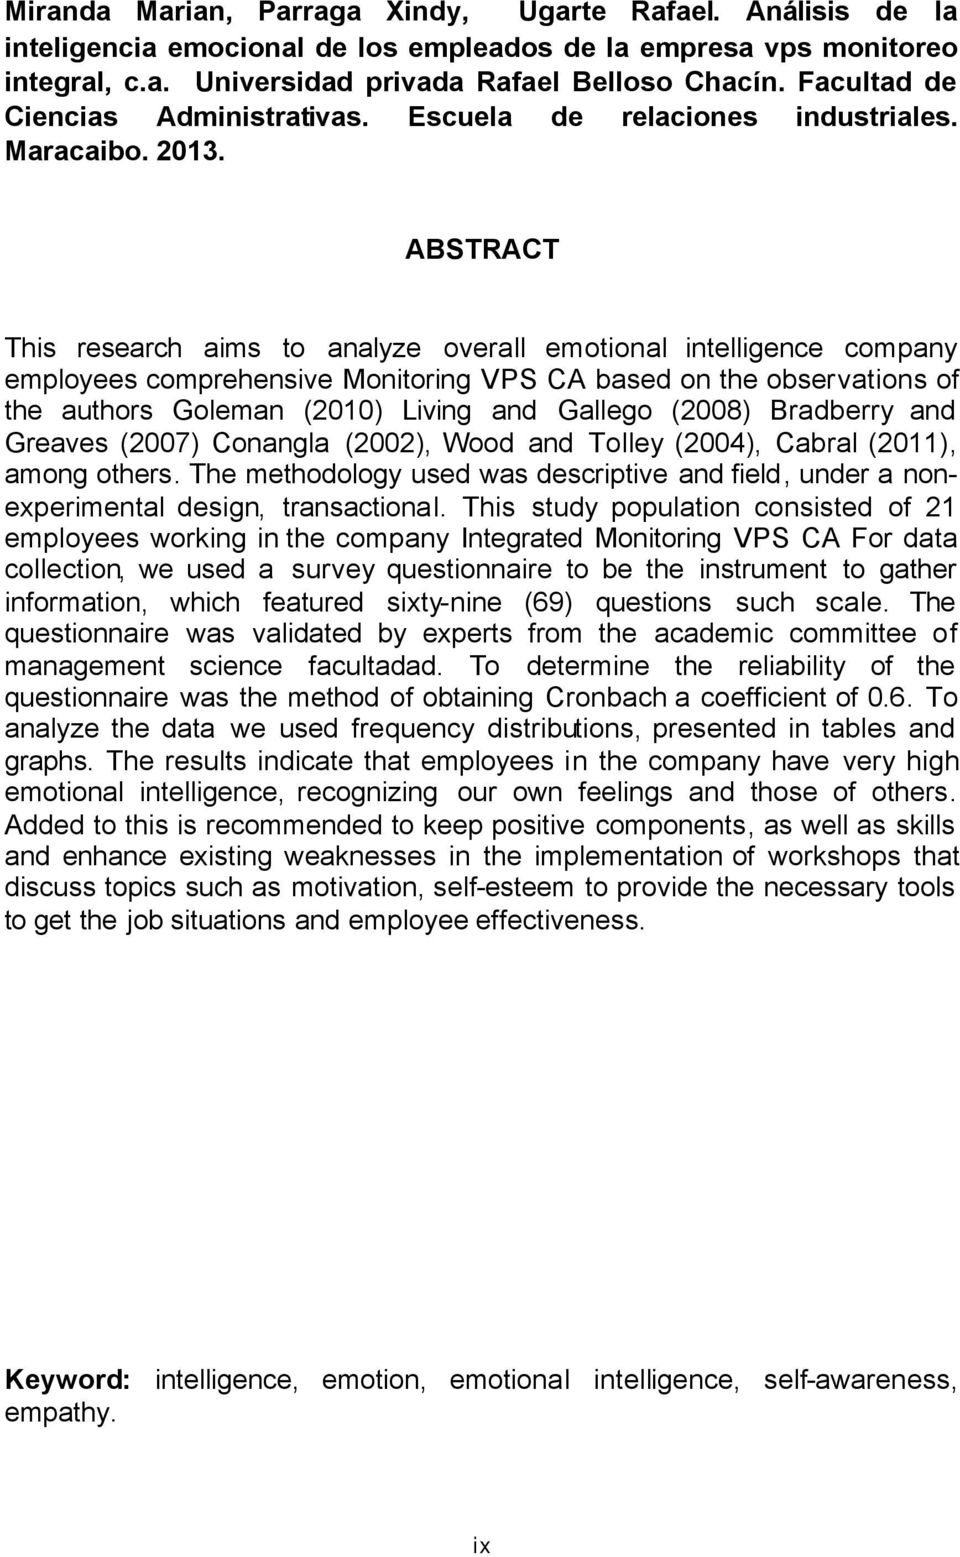 ABSTRACT This research aims to analyze overall emotional intelligence company employees comprehensive Monitoring VPS CA based on the observations of the authors Goleman (2010) Living and Gallego